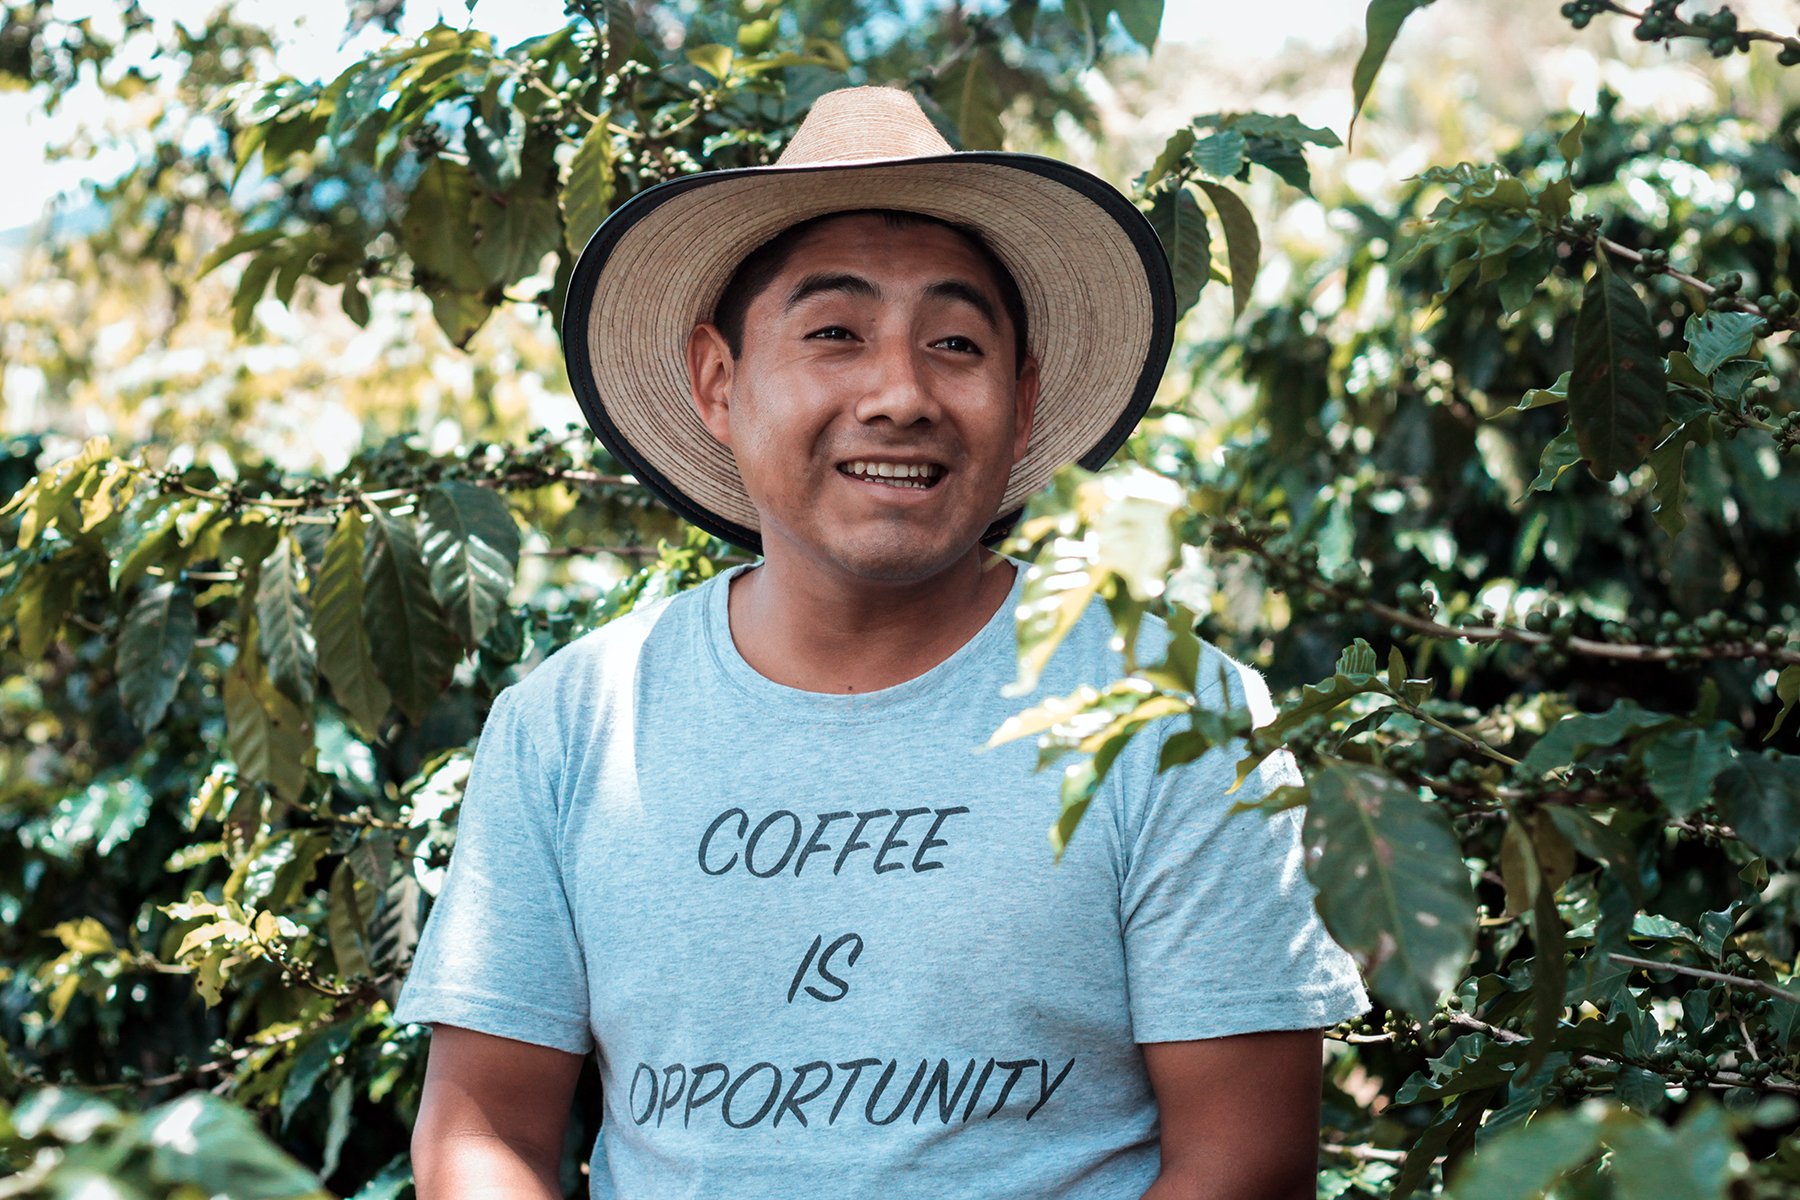 Coffee farmer with Coffee is opportunity t-shirt